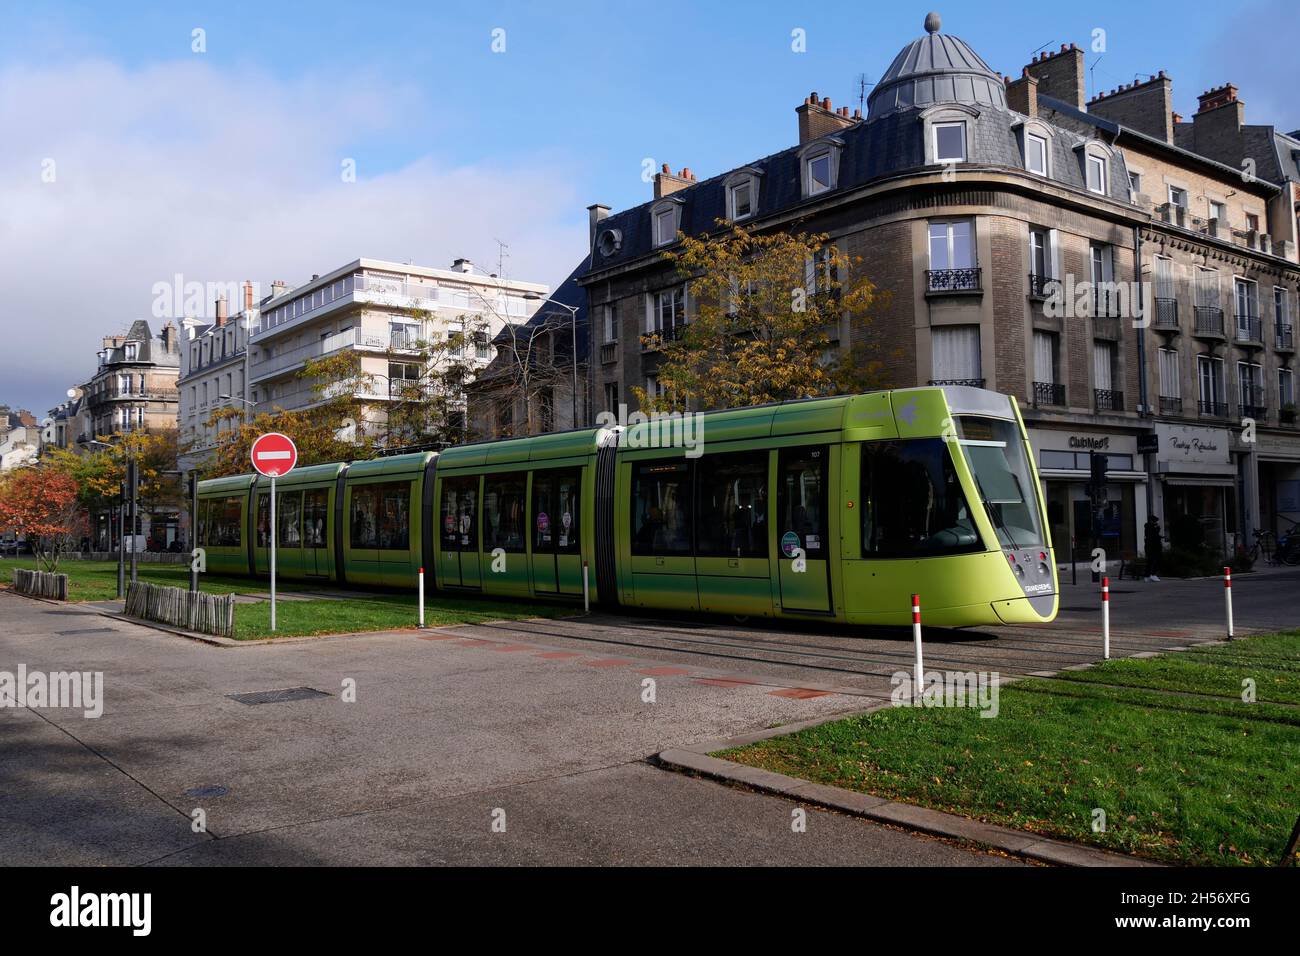 Lime green coloured Tram, Reims,Champagne, France,Europe Stock Photo